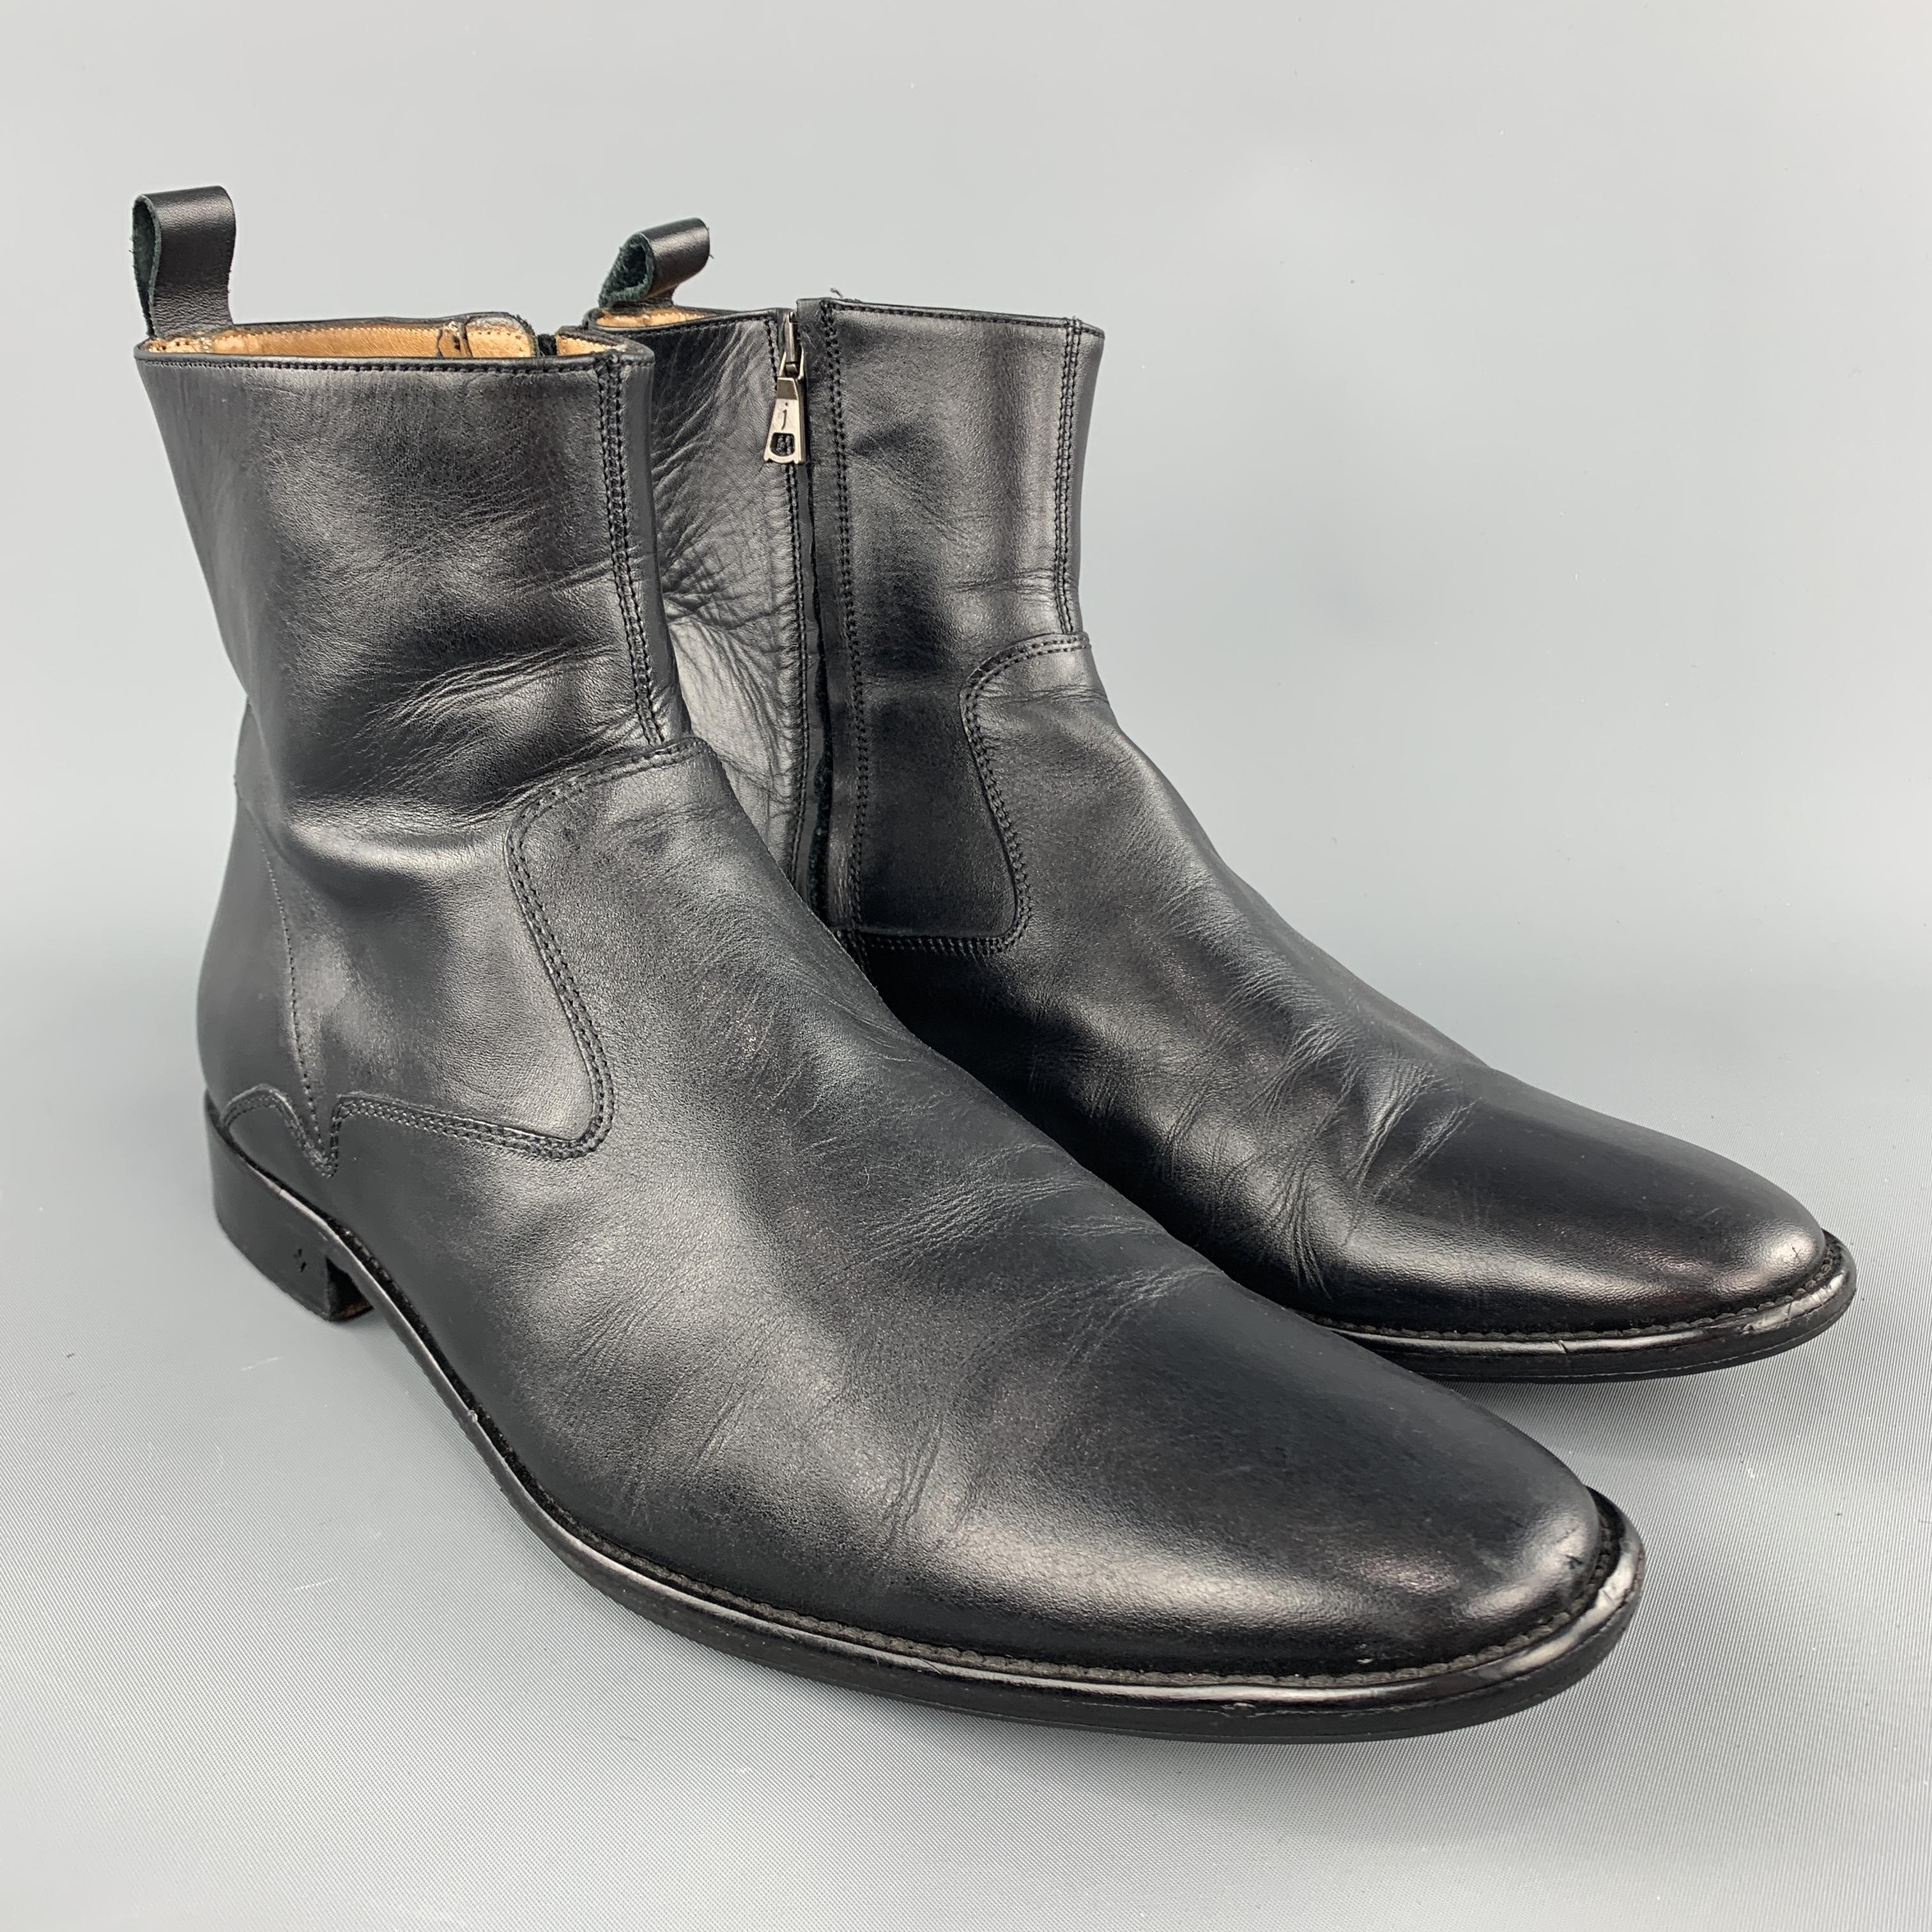 JOHN VARVATOS ankle boots come in smooth black leather with rounded point toe and inner zip closure. Hand Made in Italy.
 
Excellent Pre-Owned Condition.
Marked: 9.5
 
Outsole: 12.5 x 4 in.